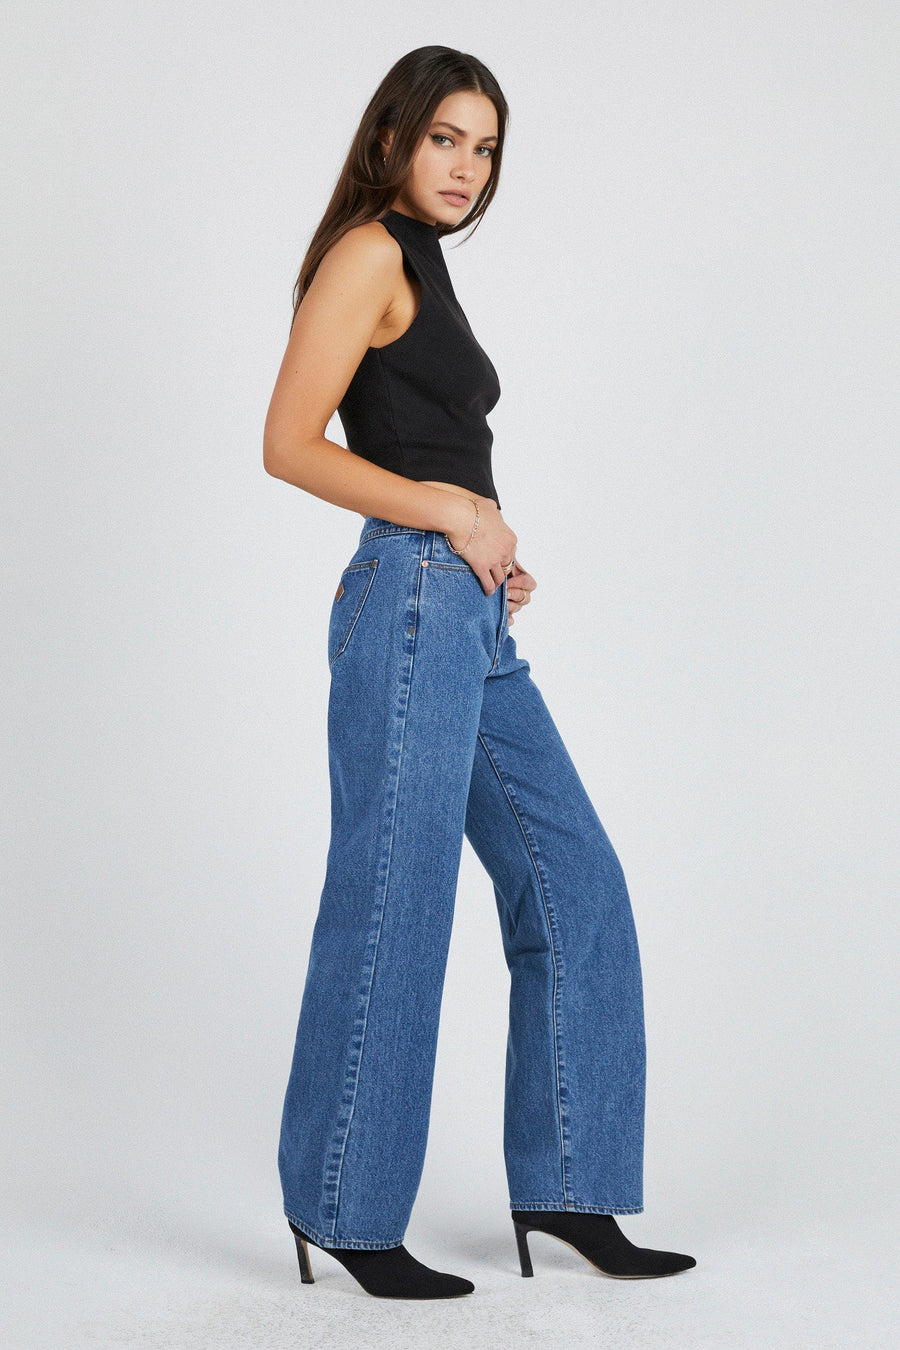 Abrand - 95 Baggy Liliana Jean in Mid Blue